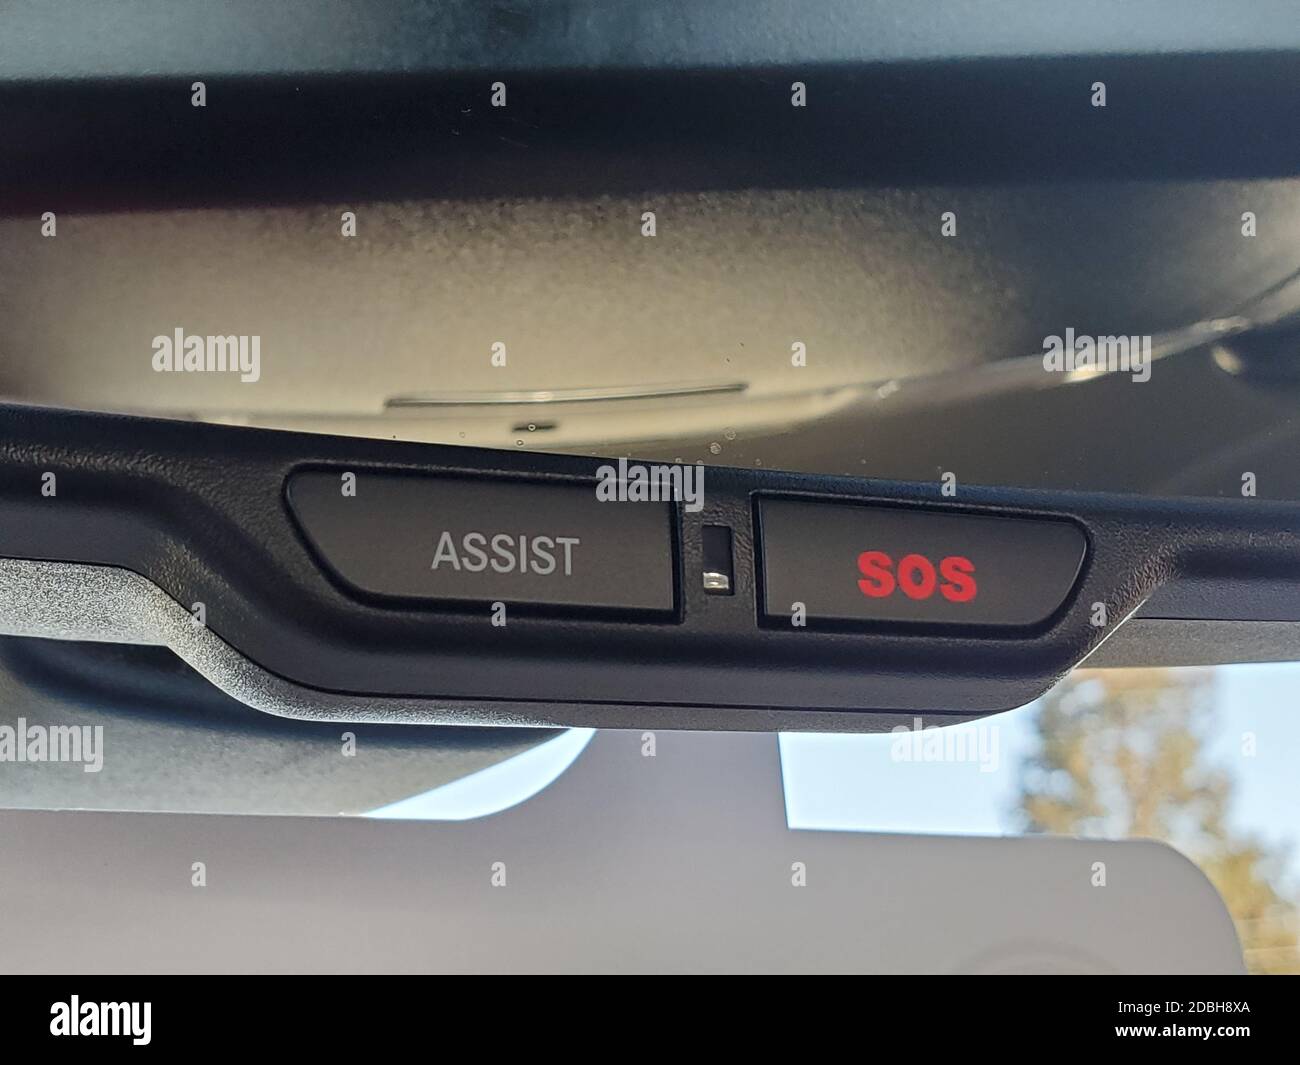 Close-up of the Assist and SOS buttons located above a car rear view mirror in Walnut Creek, California, USA, October 23, 2020. () Stock Photo